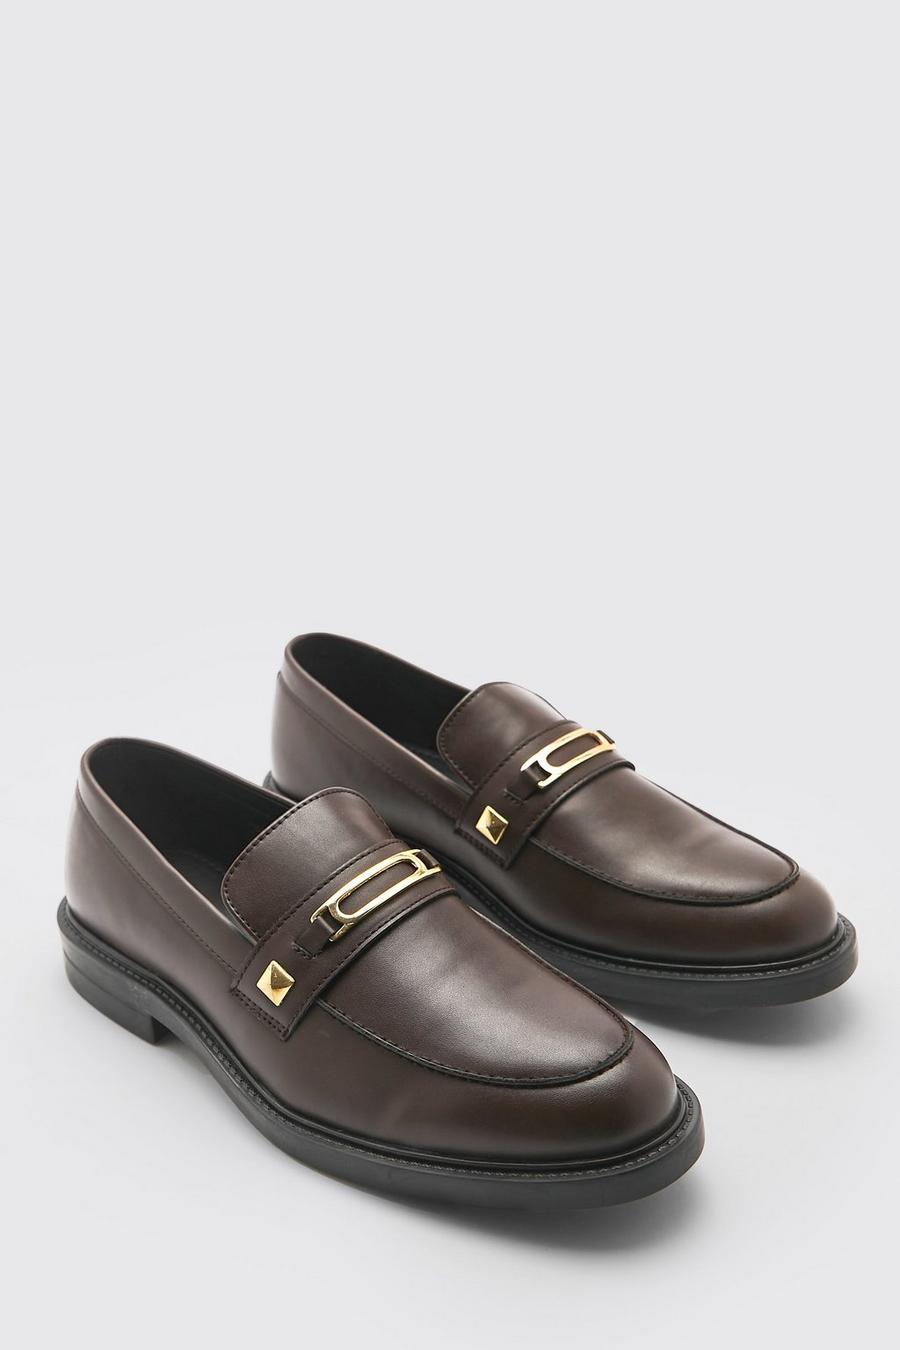 Chocolate marron Metal Work Penny Loafer